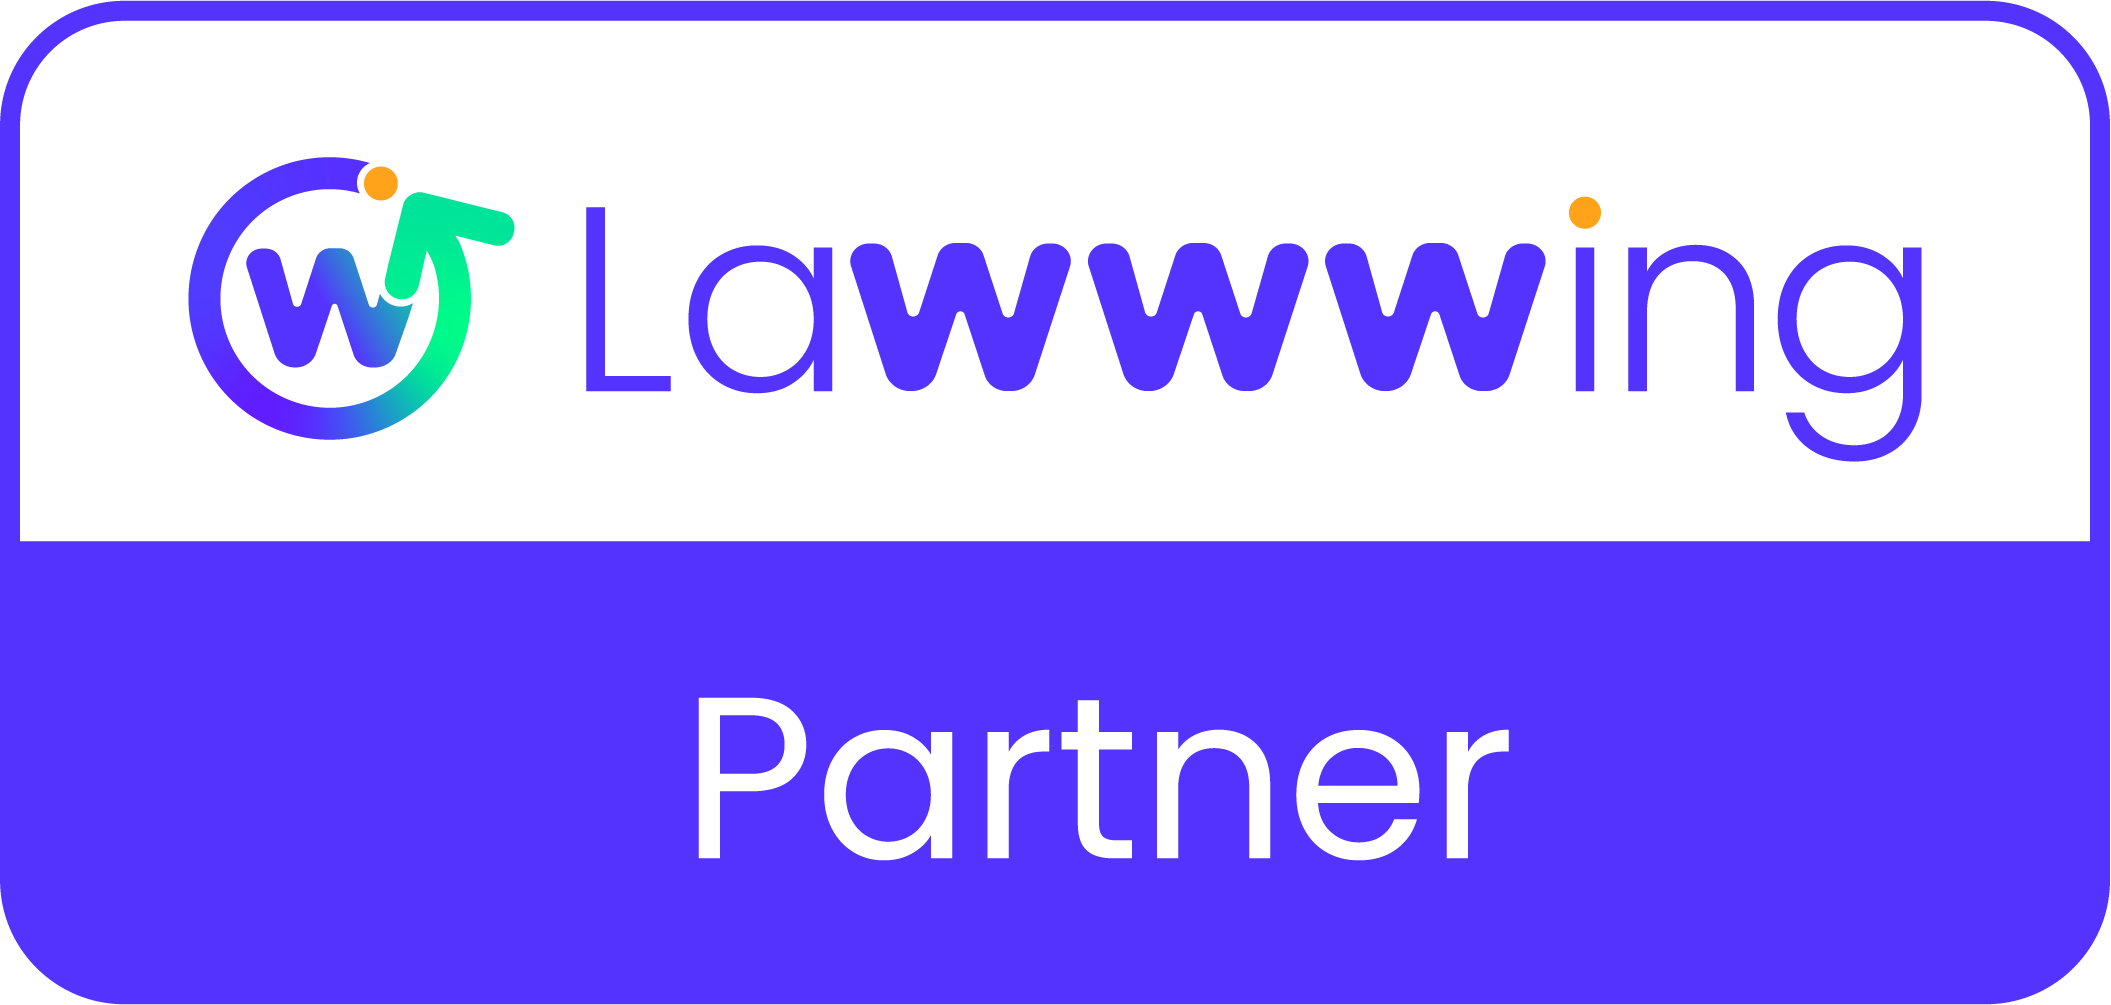 This website is partner of Lawwwing | lawwwing.com